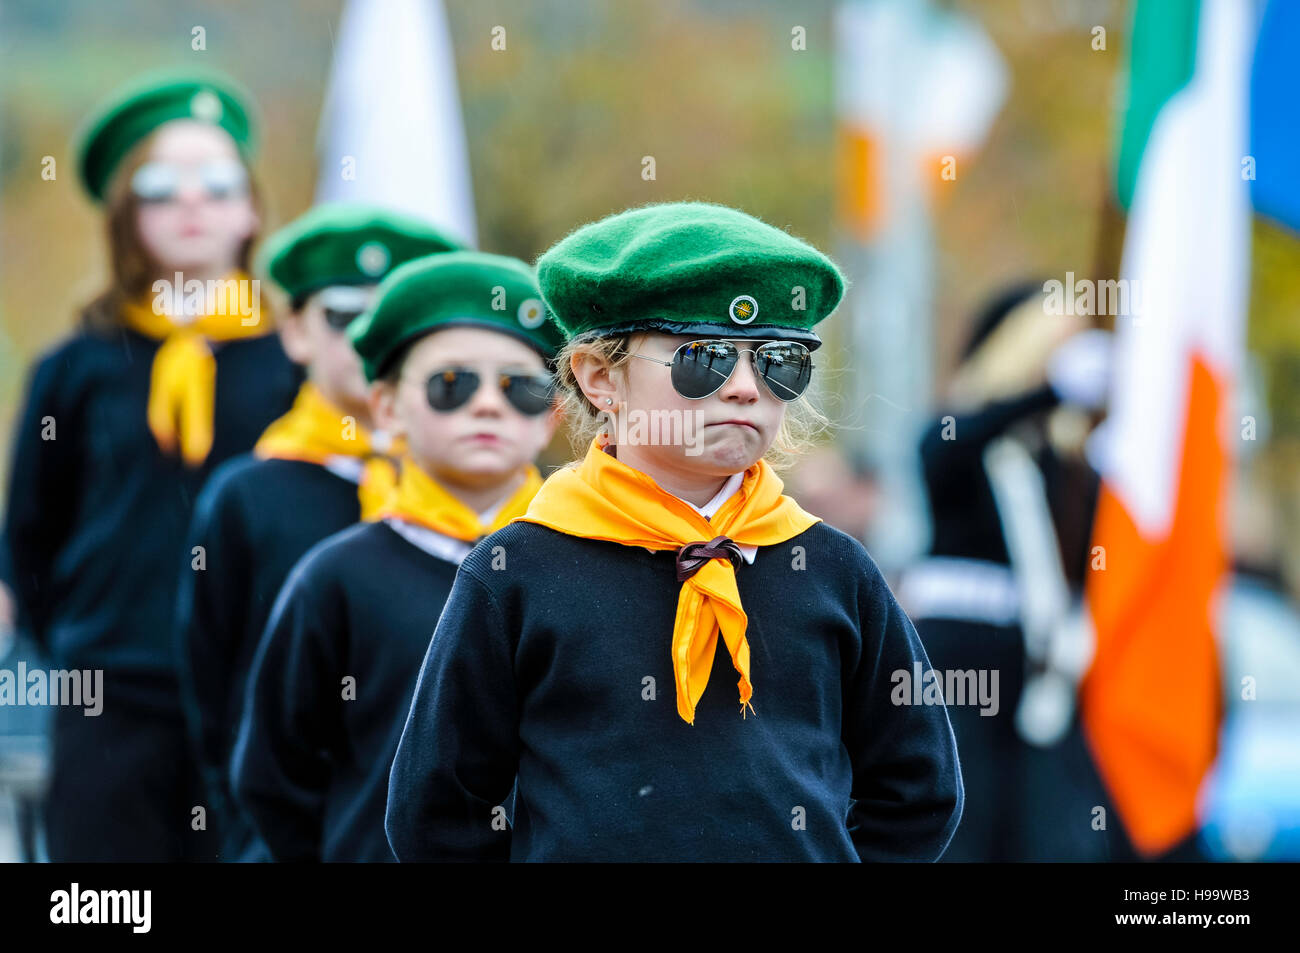 Belfast, Northern Ireland. 13 Nov 2016 - Children dressed in pseudo-paramilitary uniforms including green berets, orange neck scarfs, white shirts, black jumpers and wearing mirrored sunglasses take part in an Irish Republican Parade. Stock Photo